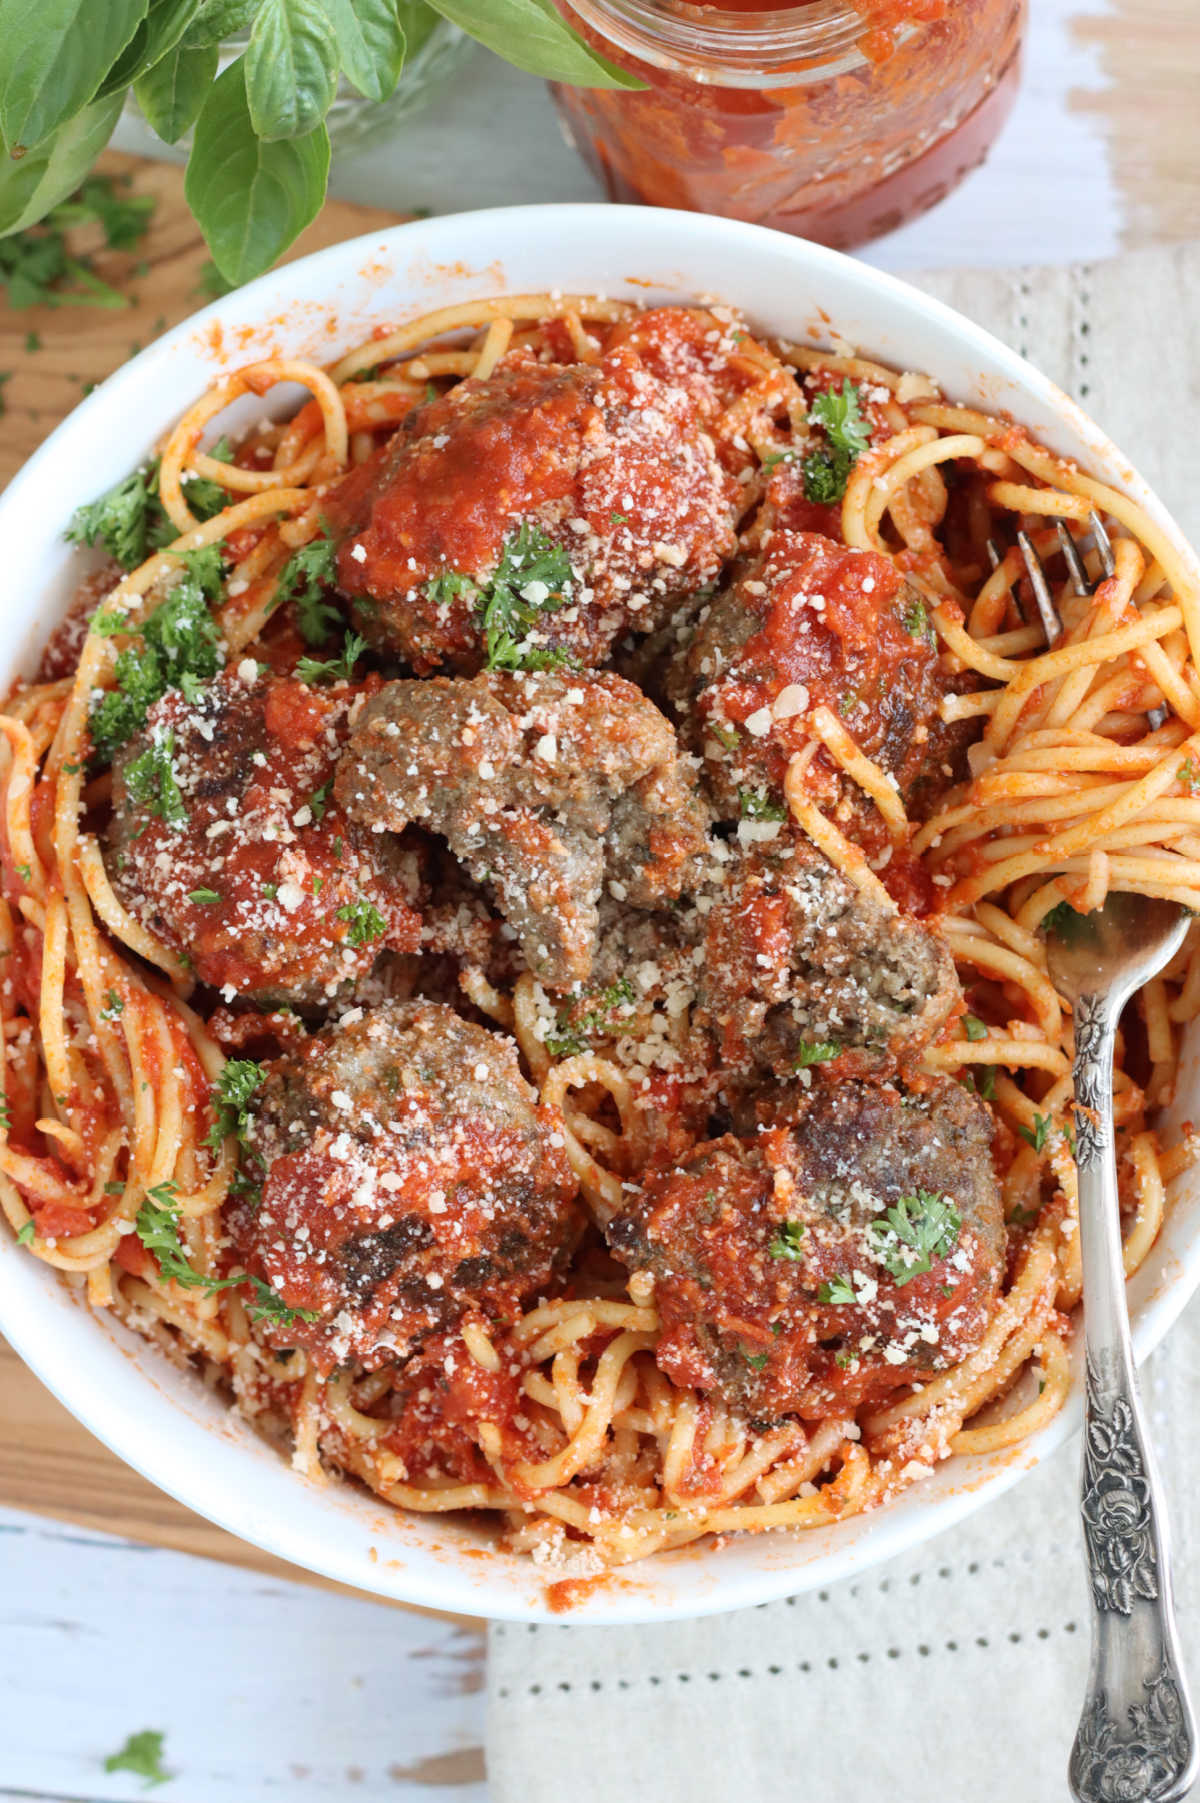 Spaghetti and meatballs in white bowl with fork on right.